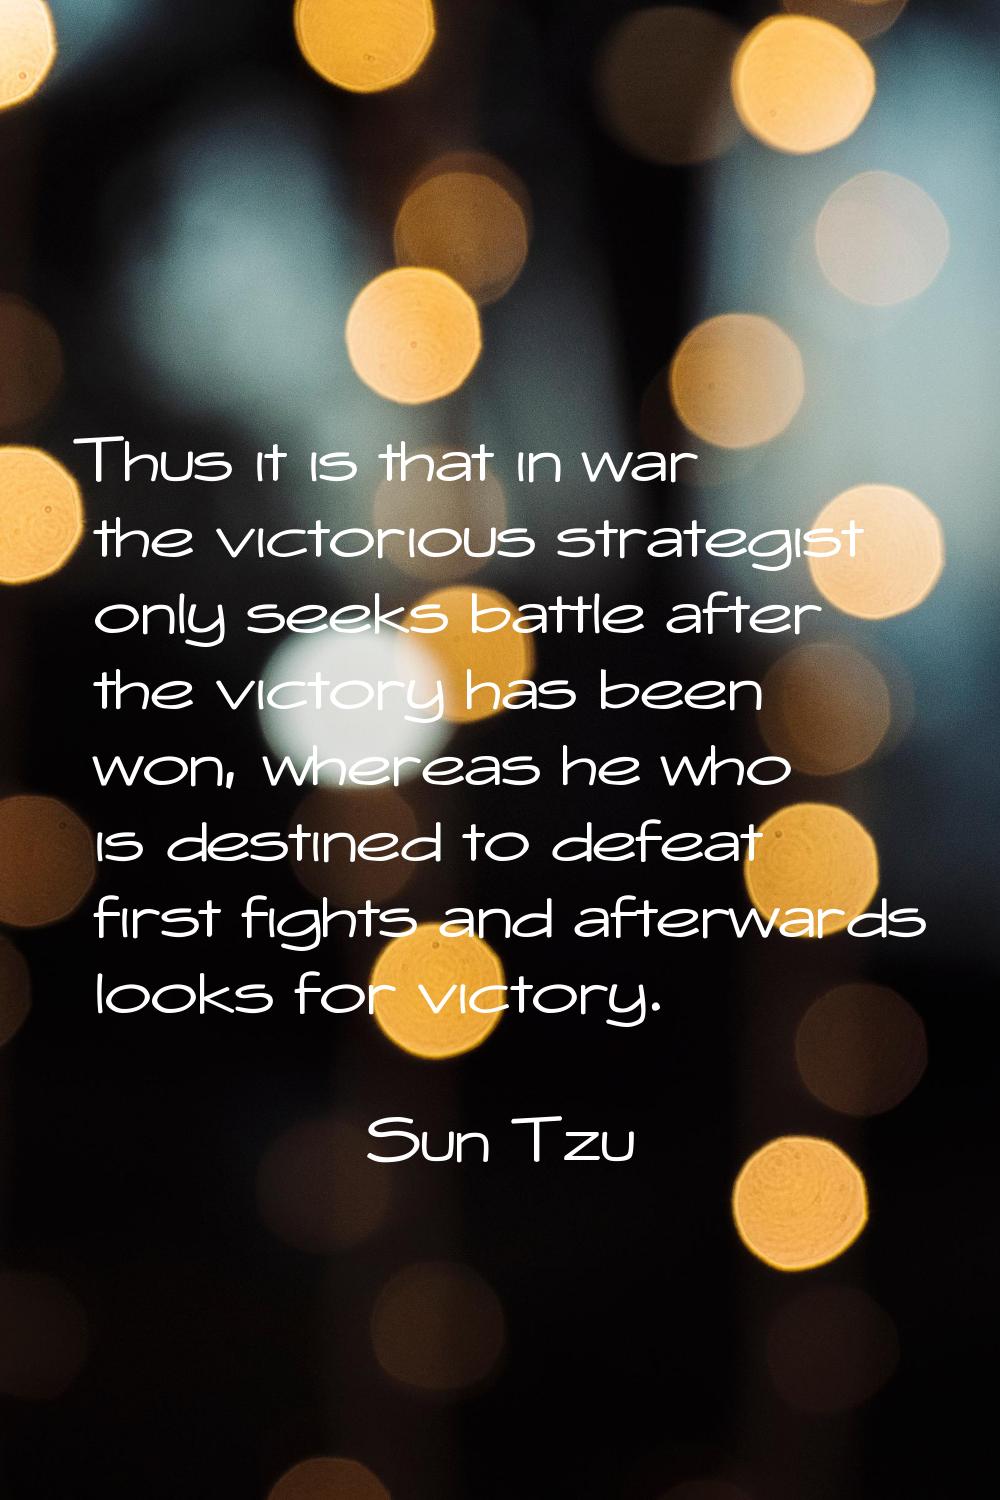 Thus it is that in war the victorious strategist only seeks battle after the victory has been won, 